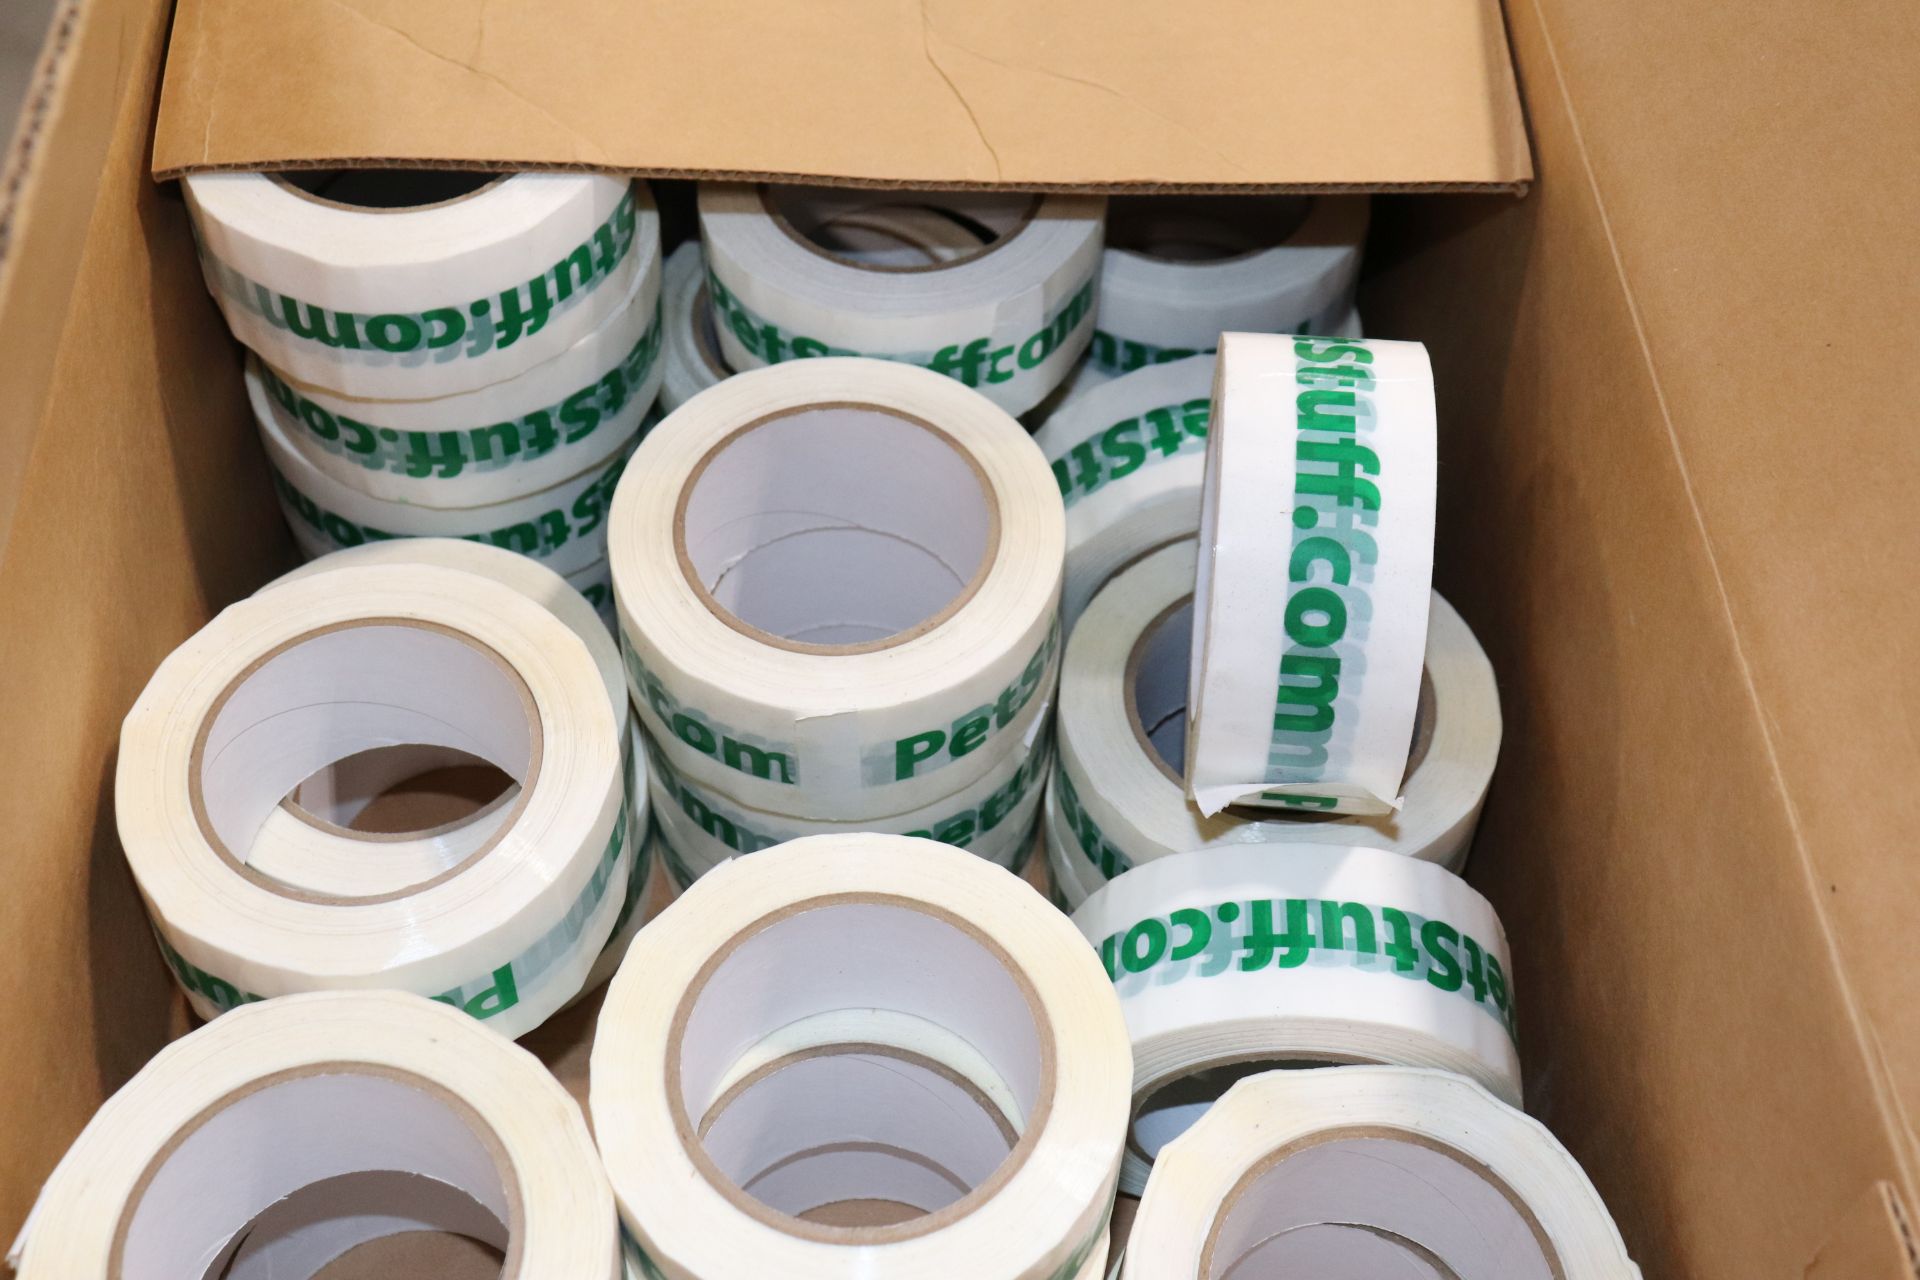 One box of Pet Stuff branded packing tape and window curtains - Image 3 of 3